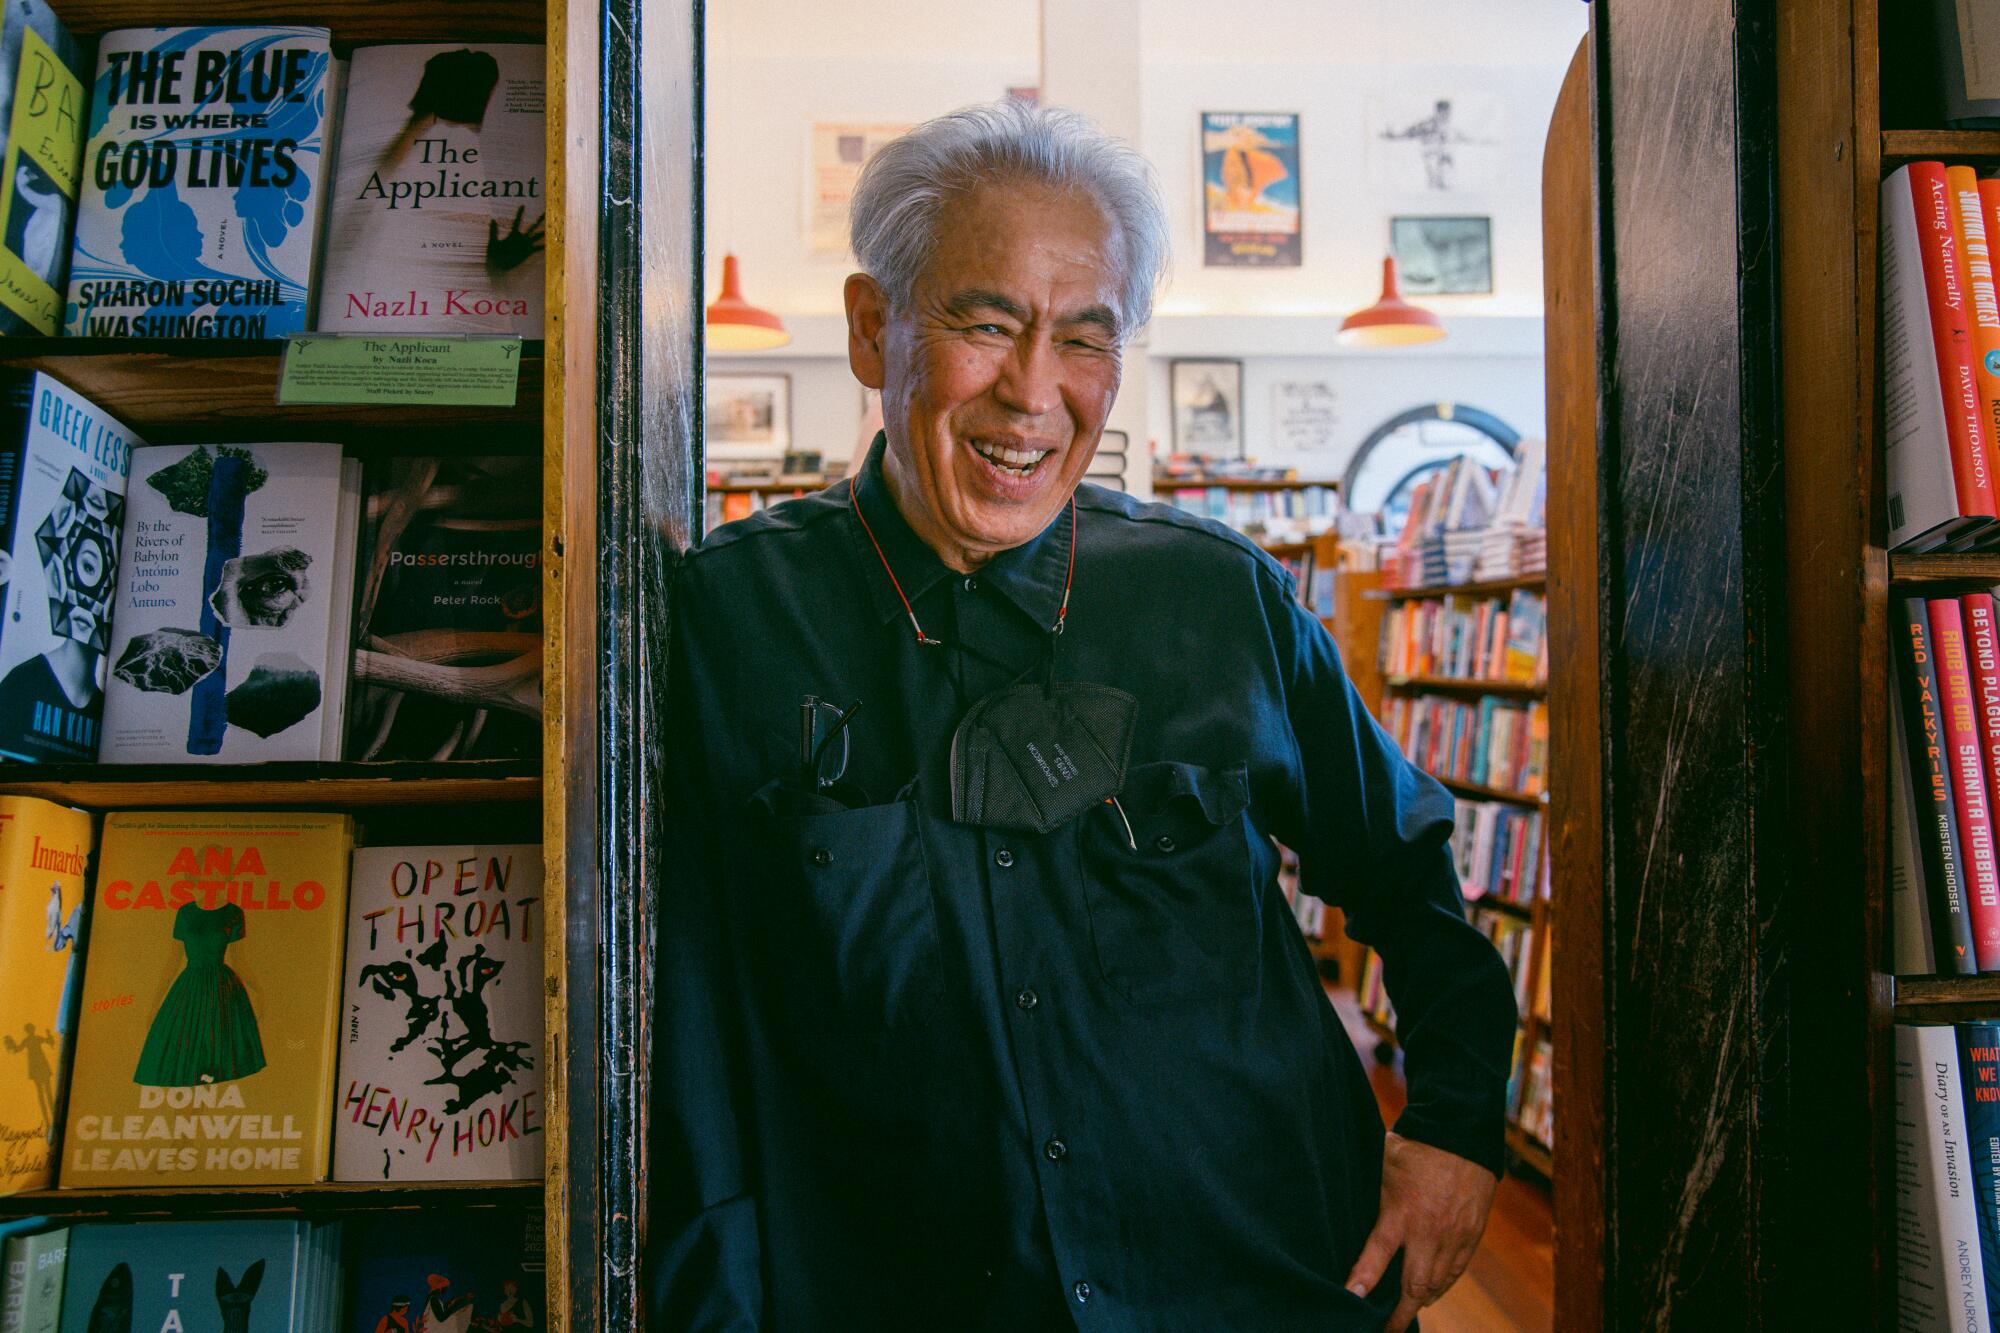 A gray-haired man dressed in black leans against a bookstore shelf.